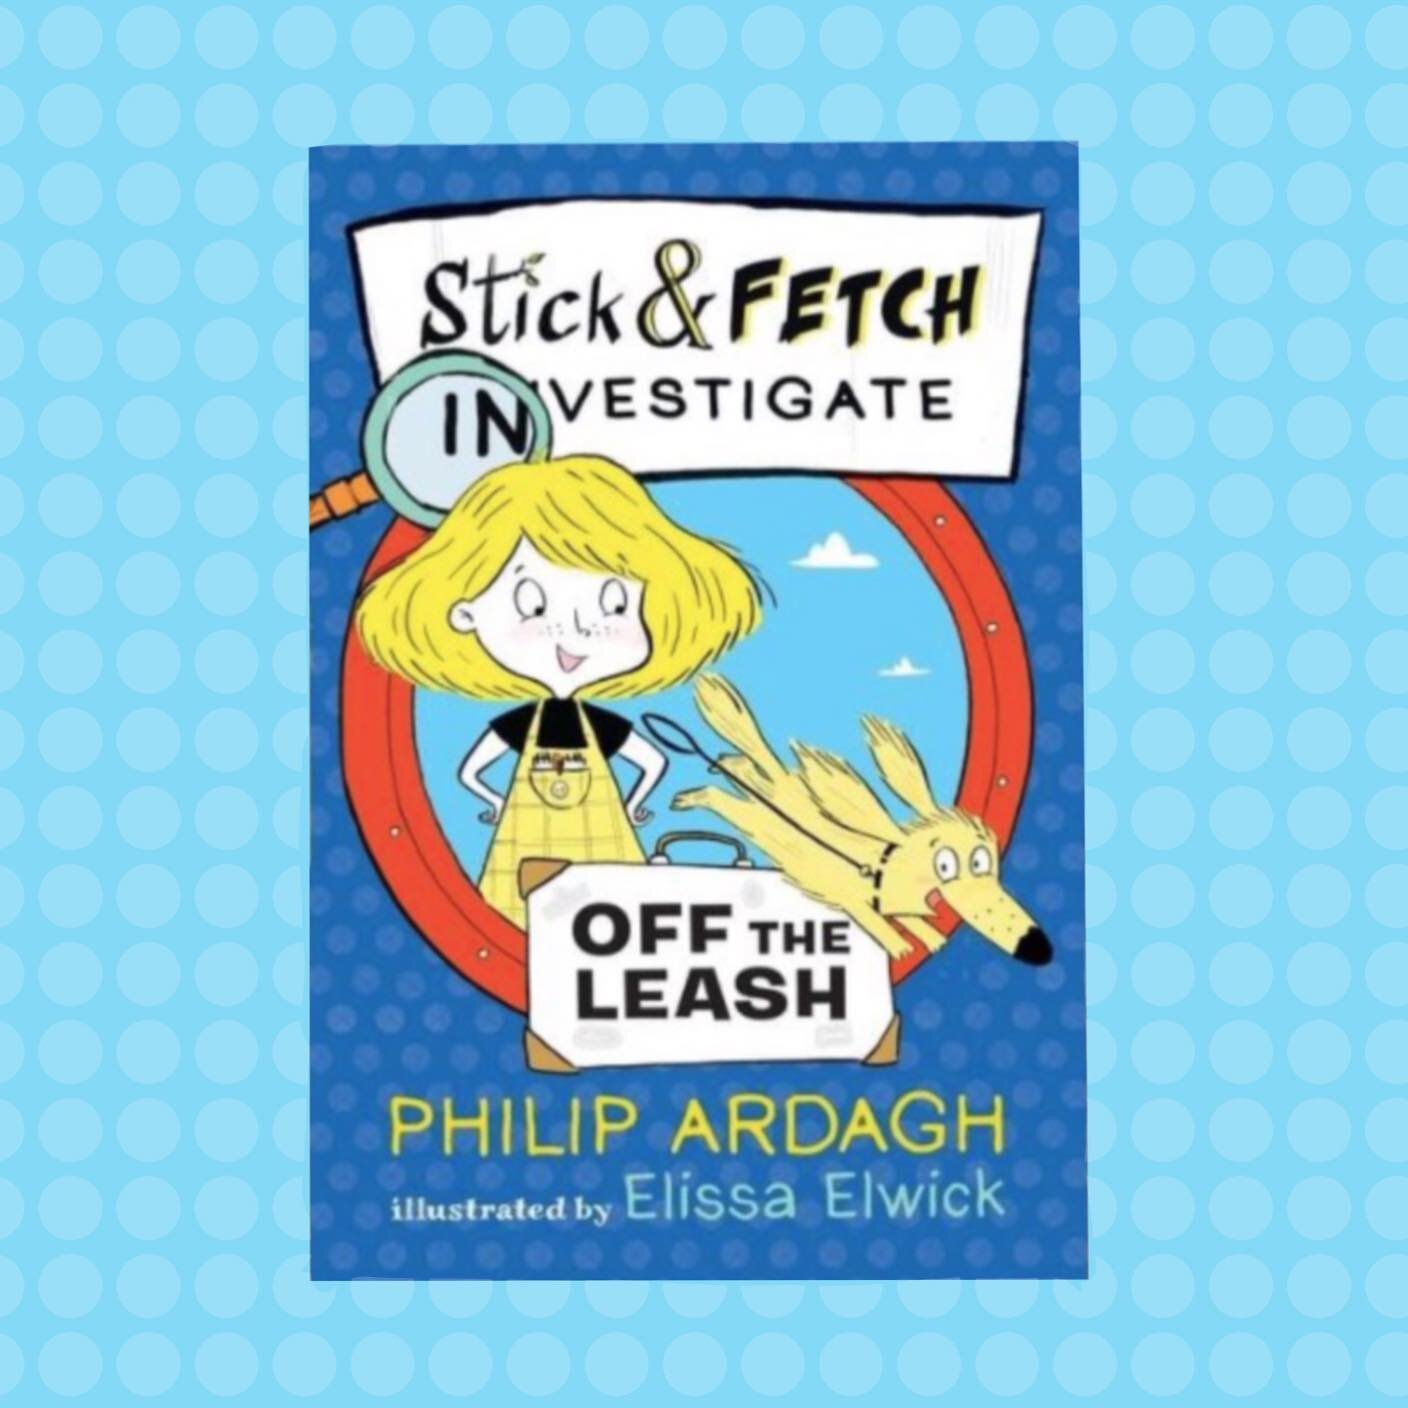 🎉 It&rsquo;s publication day for Stick &amp; Fetch Investigate: Off The Leash 🎉 The third in this fun series, written by @philipardagh and illustrated by me! 🥳

These books have been lots of fun to work on and I&rsquo;m very fond of Sally Stick an